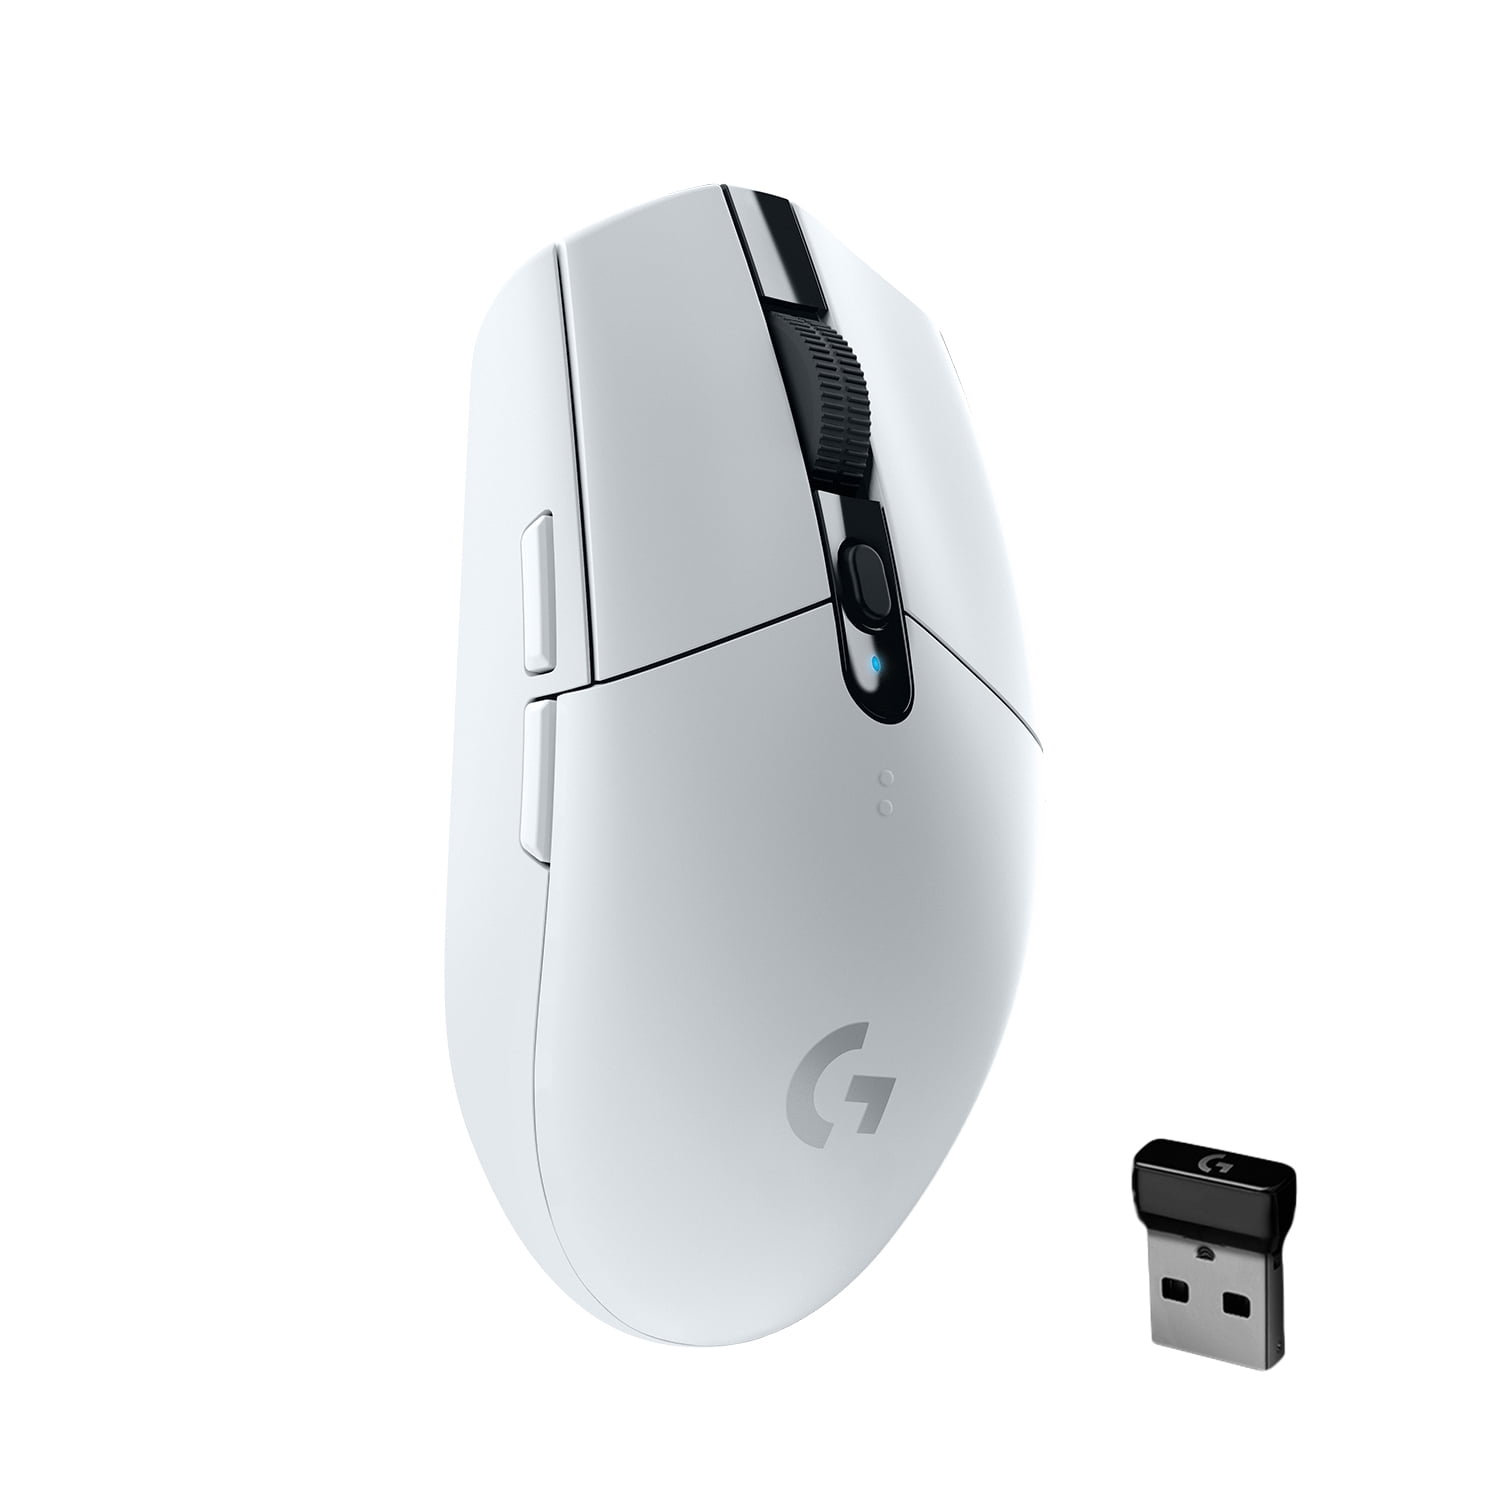 forening ikke noget Stramme Logitech G305 LIGHTSPEED Wireless Gaming Mouse, HERO Sensor, 12,000 DPI,  Lightweight, 6 Programmable Buttons, 250h Battery, On-Board Memory,  Compatible with PC, Mac - White - Walmart.com